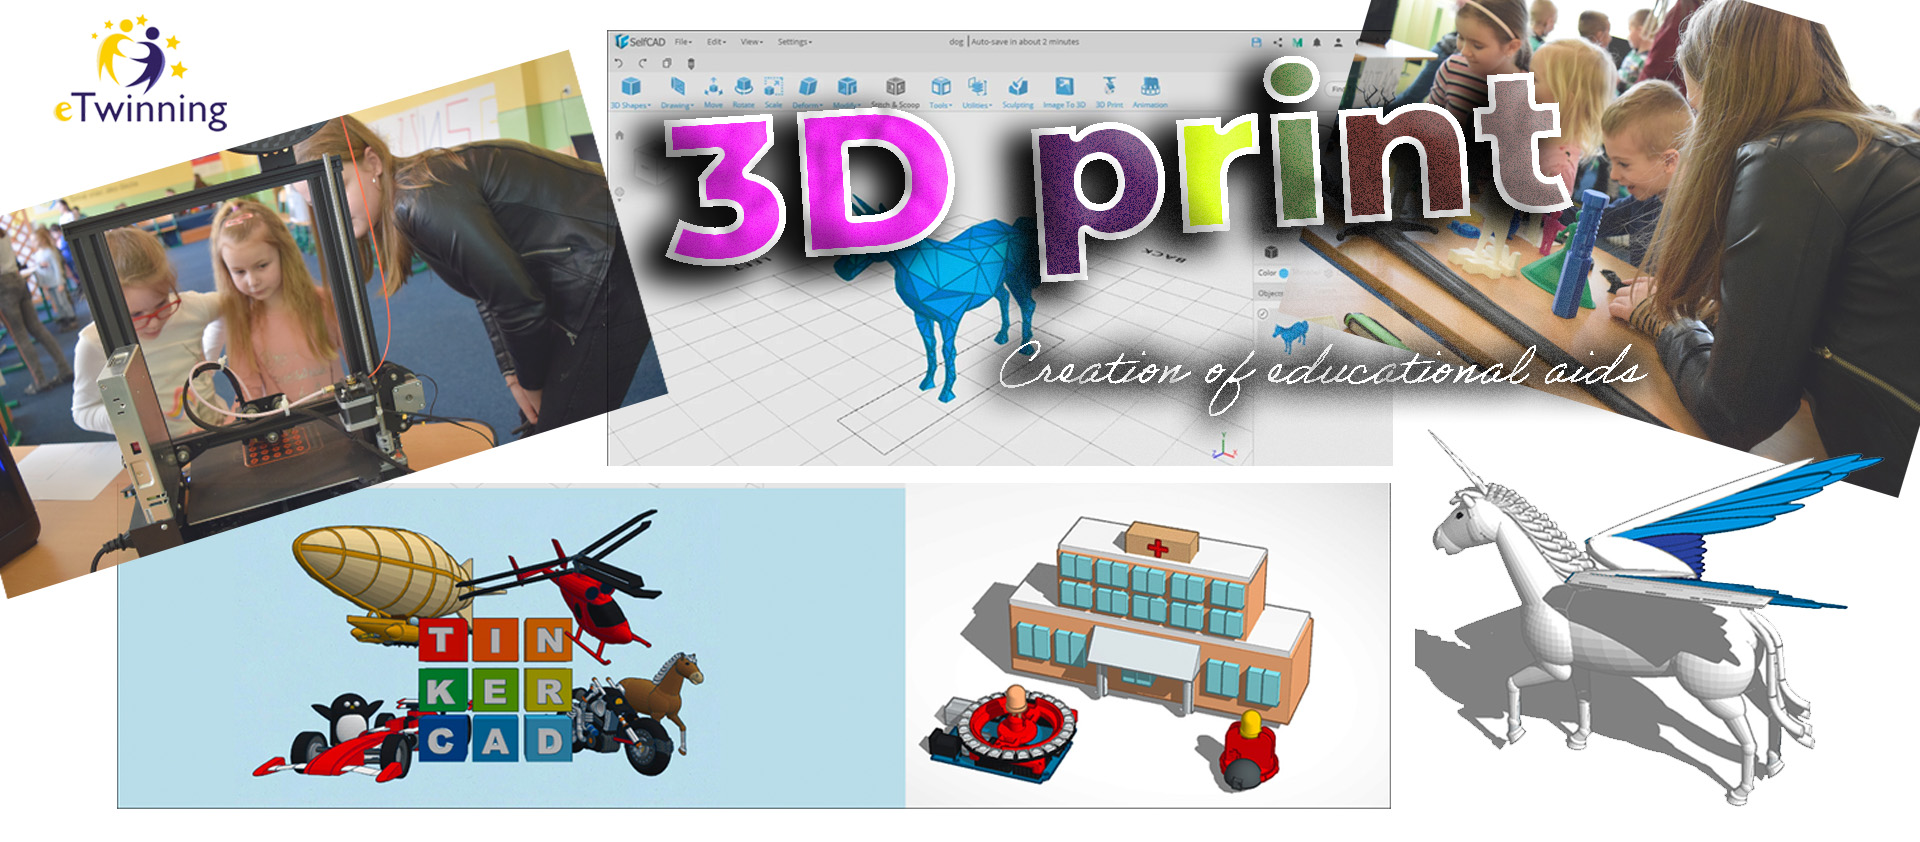 3D print – Creation of educational aids